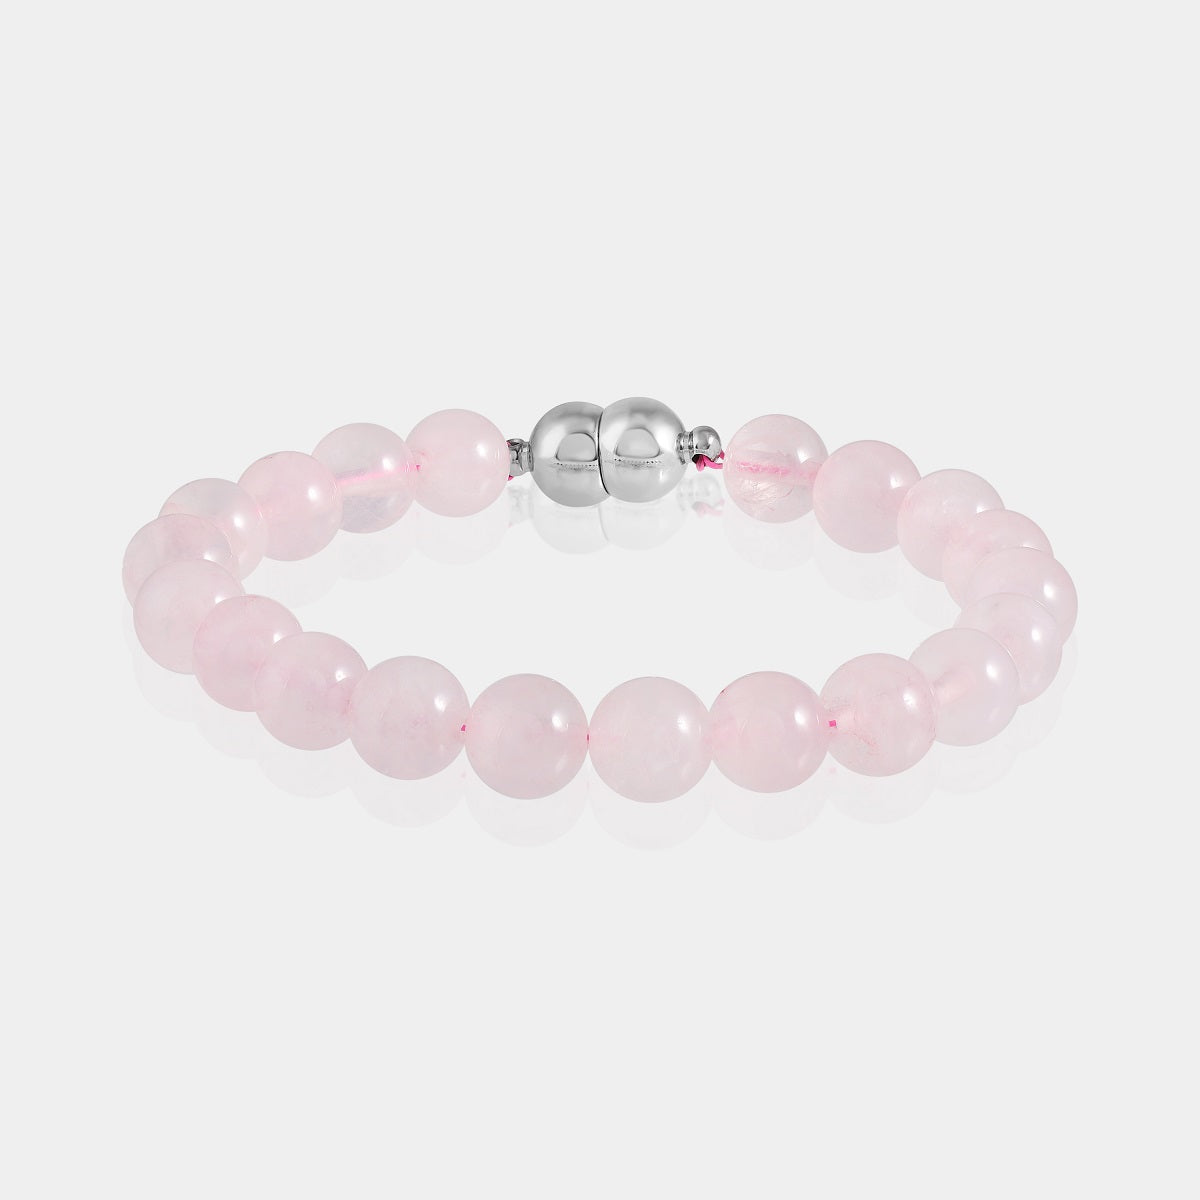 8mm smooth round Rose Quartz beads, radiating a gentle and soothing pink color